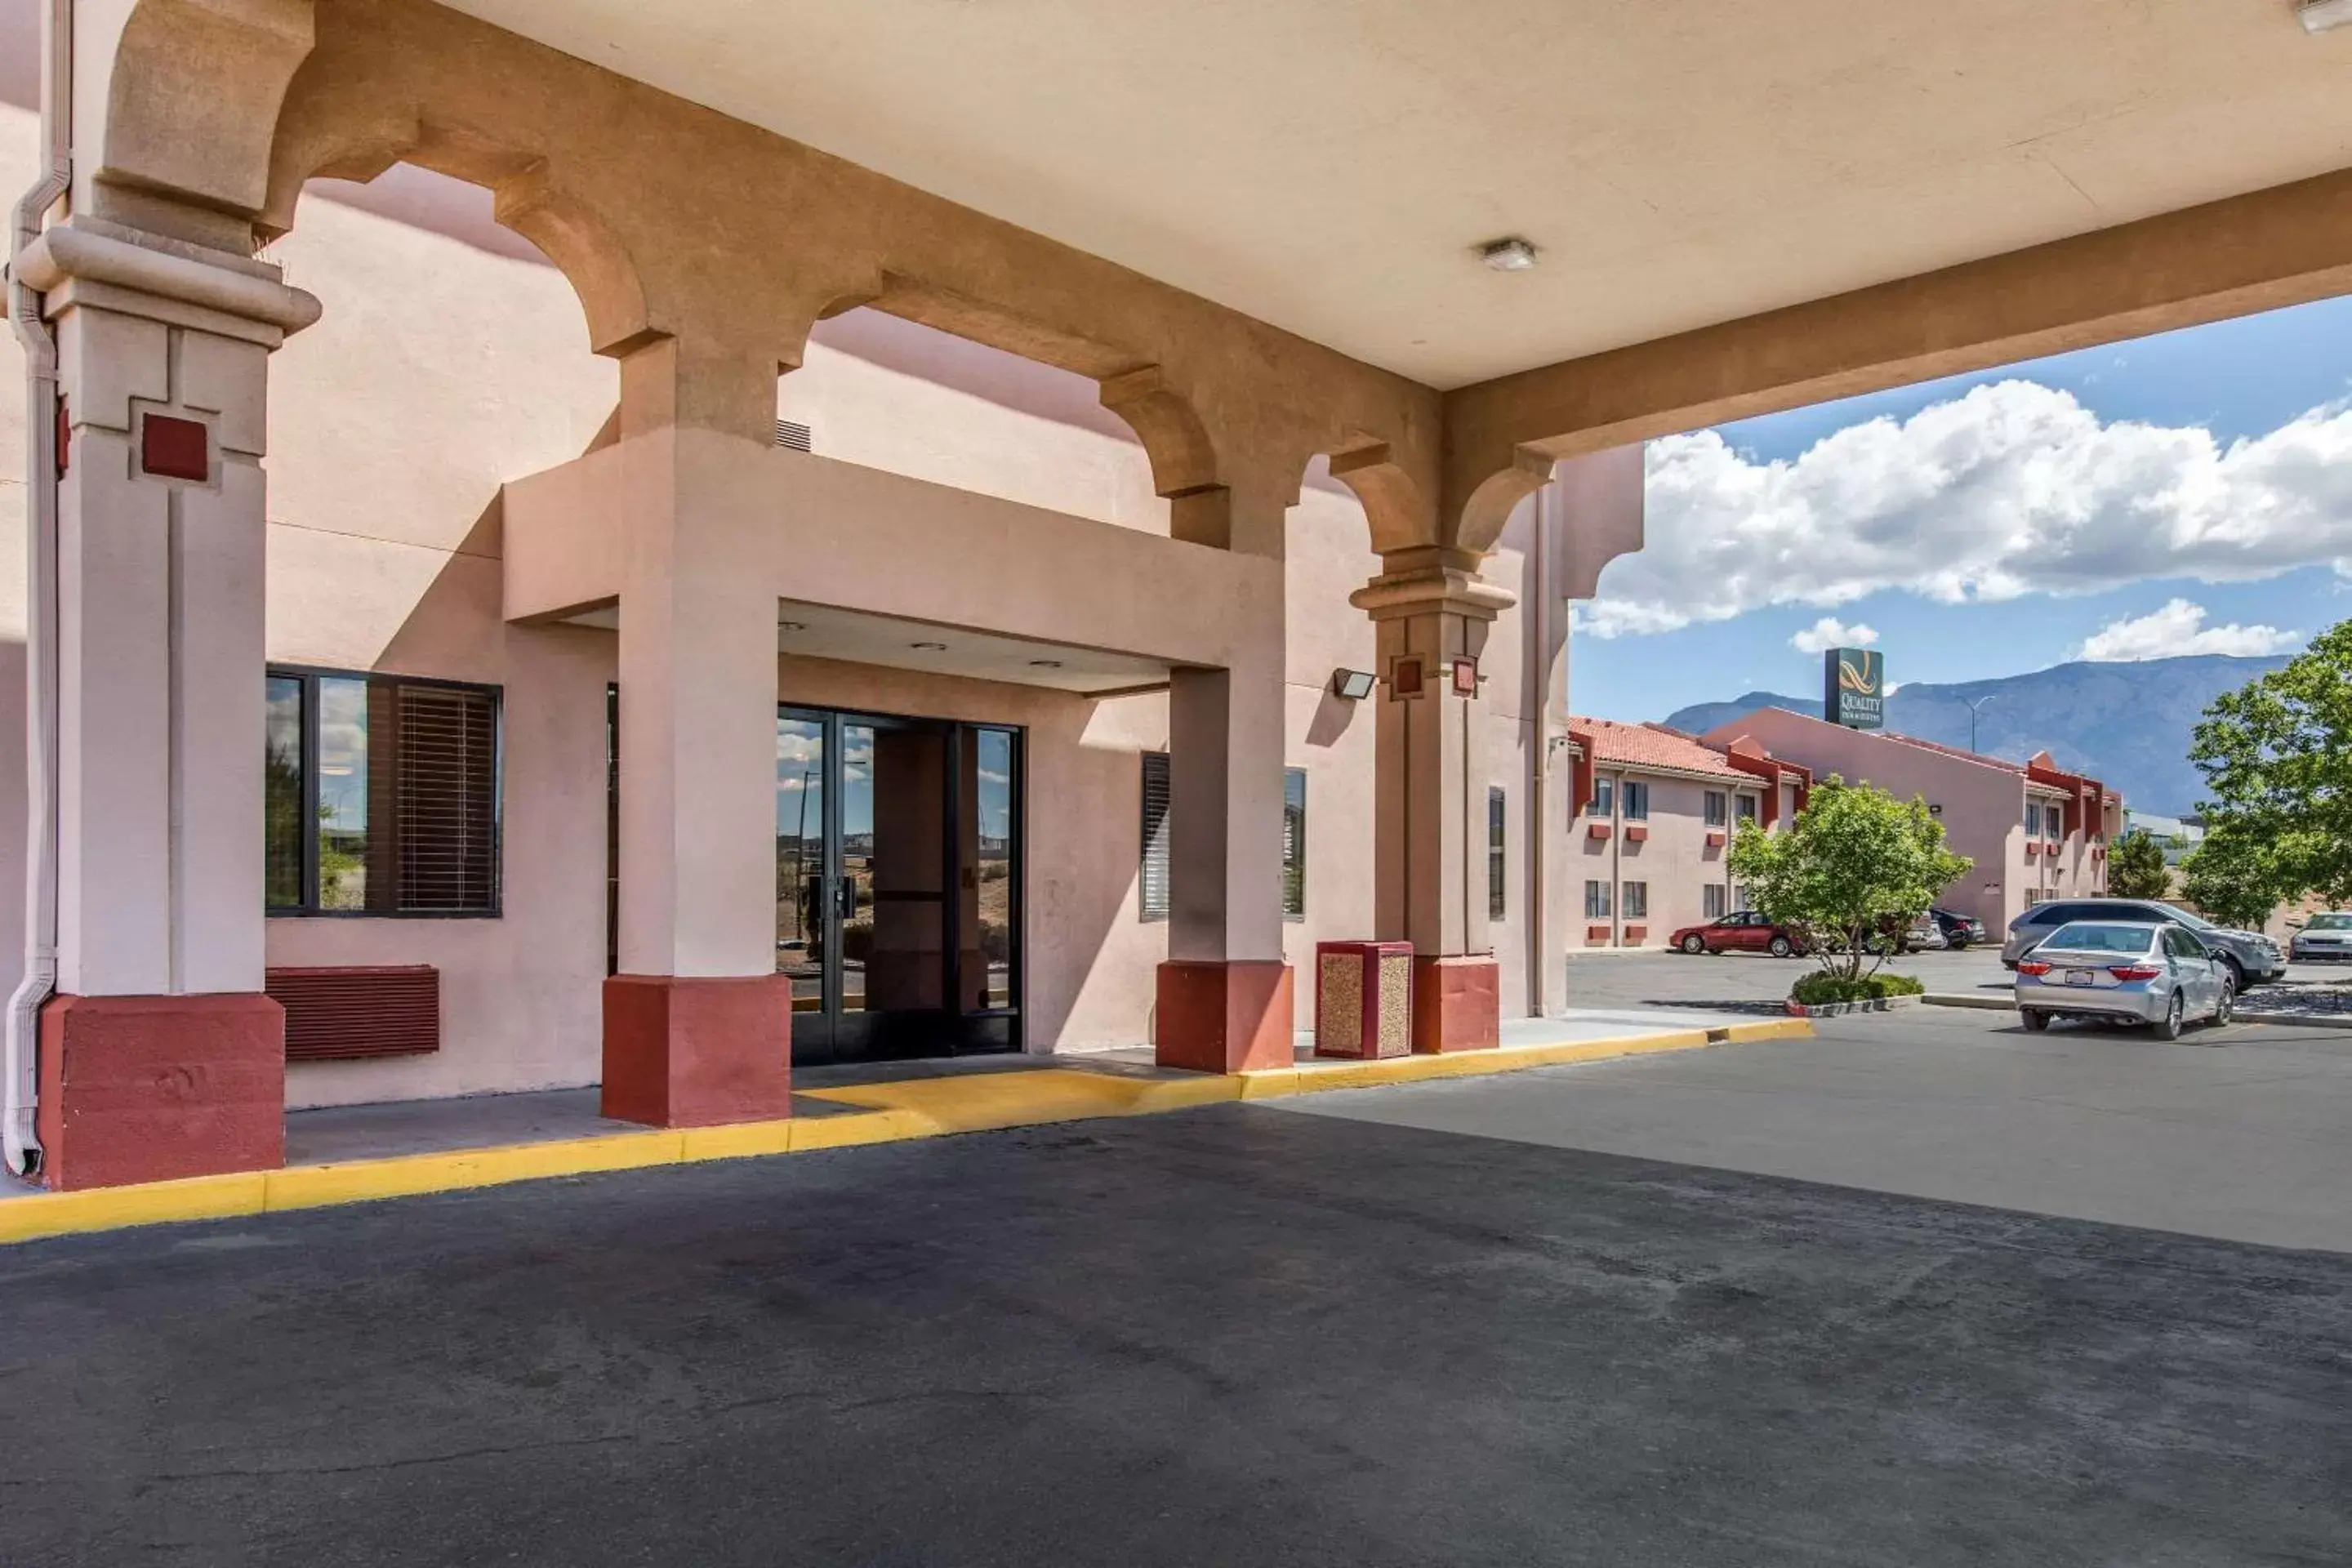 Property building in Quality Inn & Suites Albuquerque North near Balloon Fiesta Park